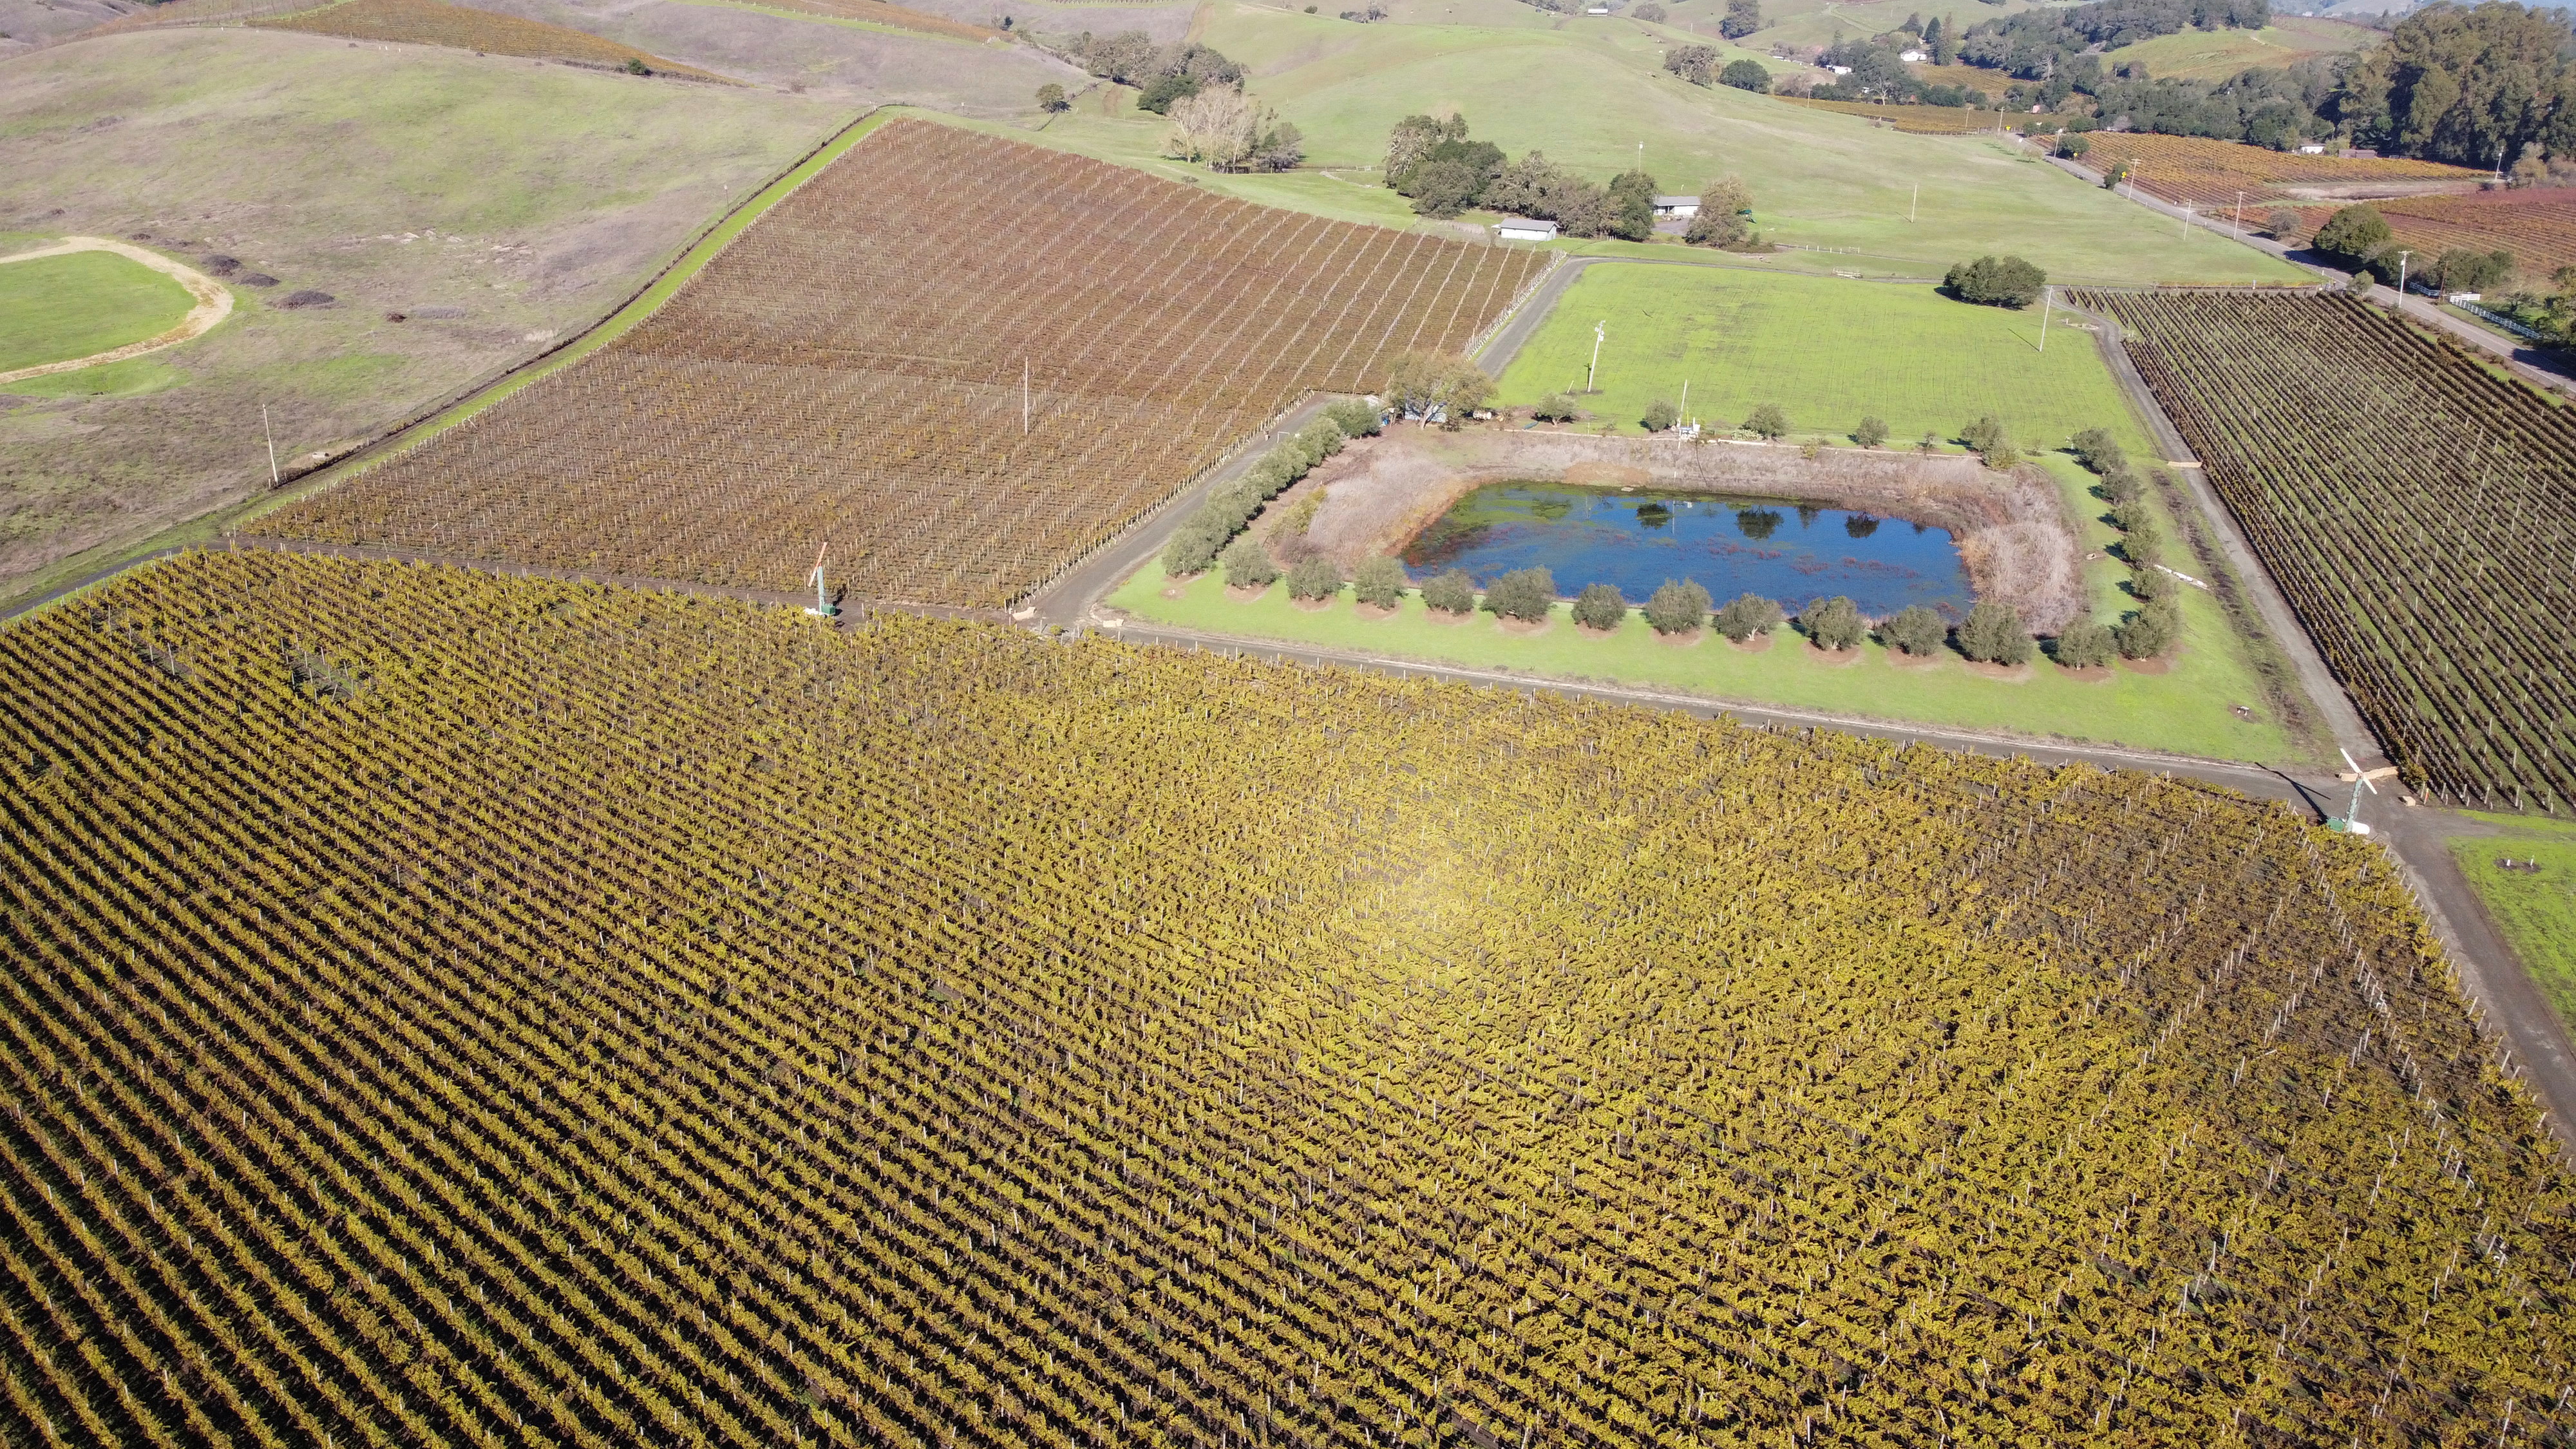 Pine Ridge Vineyard's Carneros appellation is seen in Napa, California, U.S. November 11, 2021.  Picture taken with a drone on November 11, 2021. REUTERS/Nathan Frandino